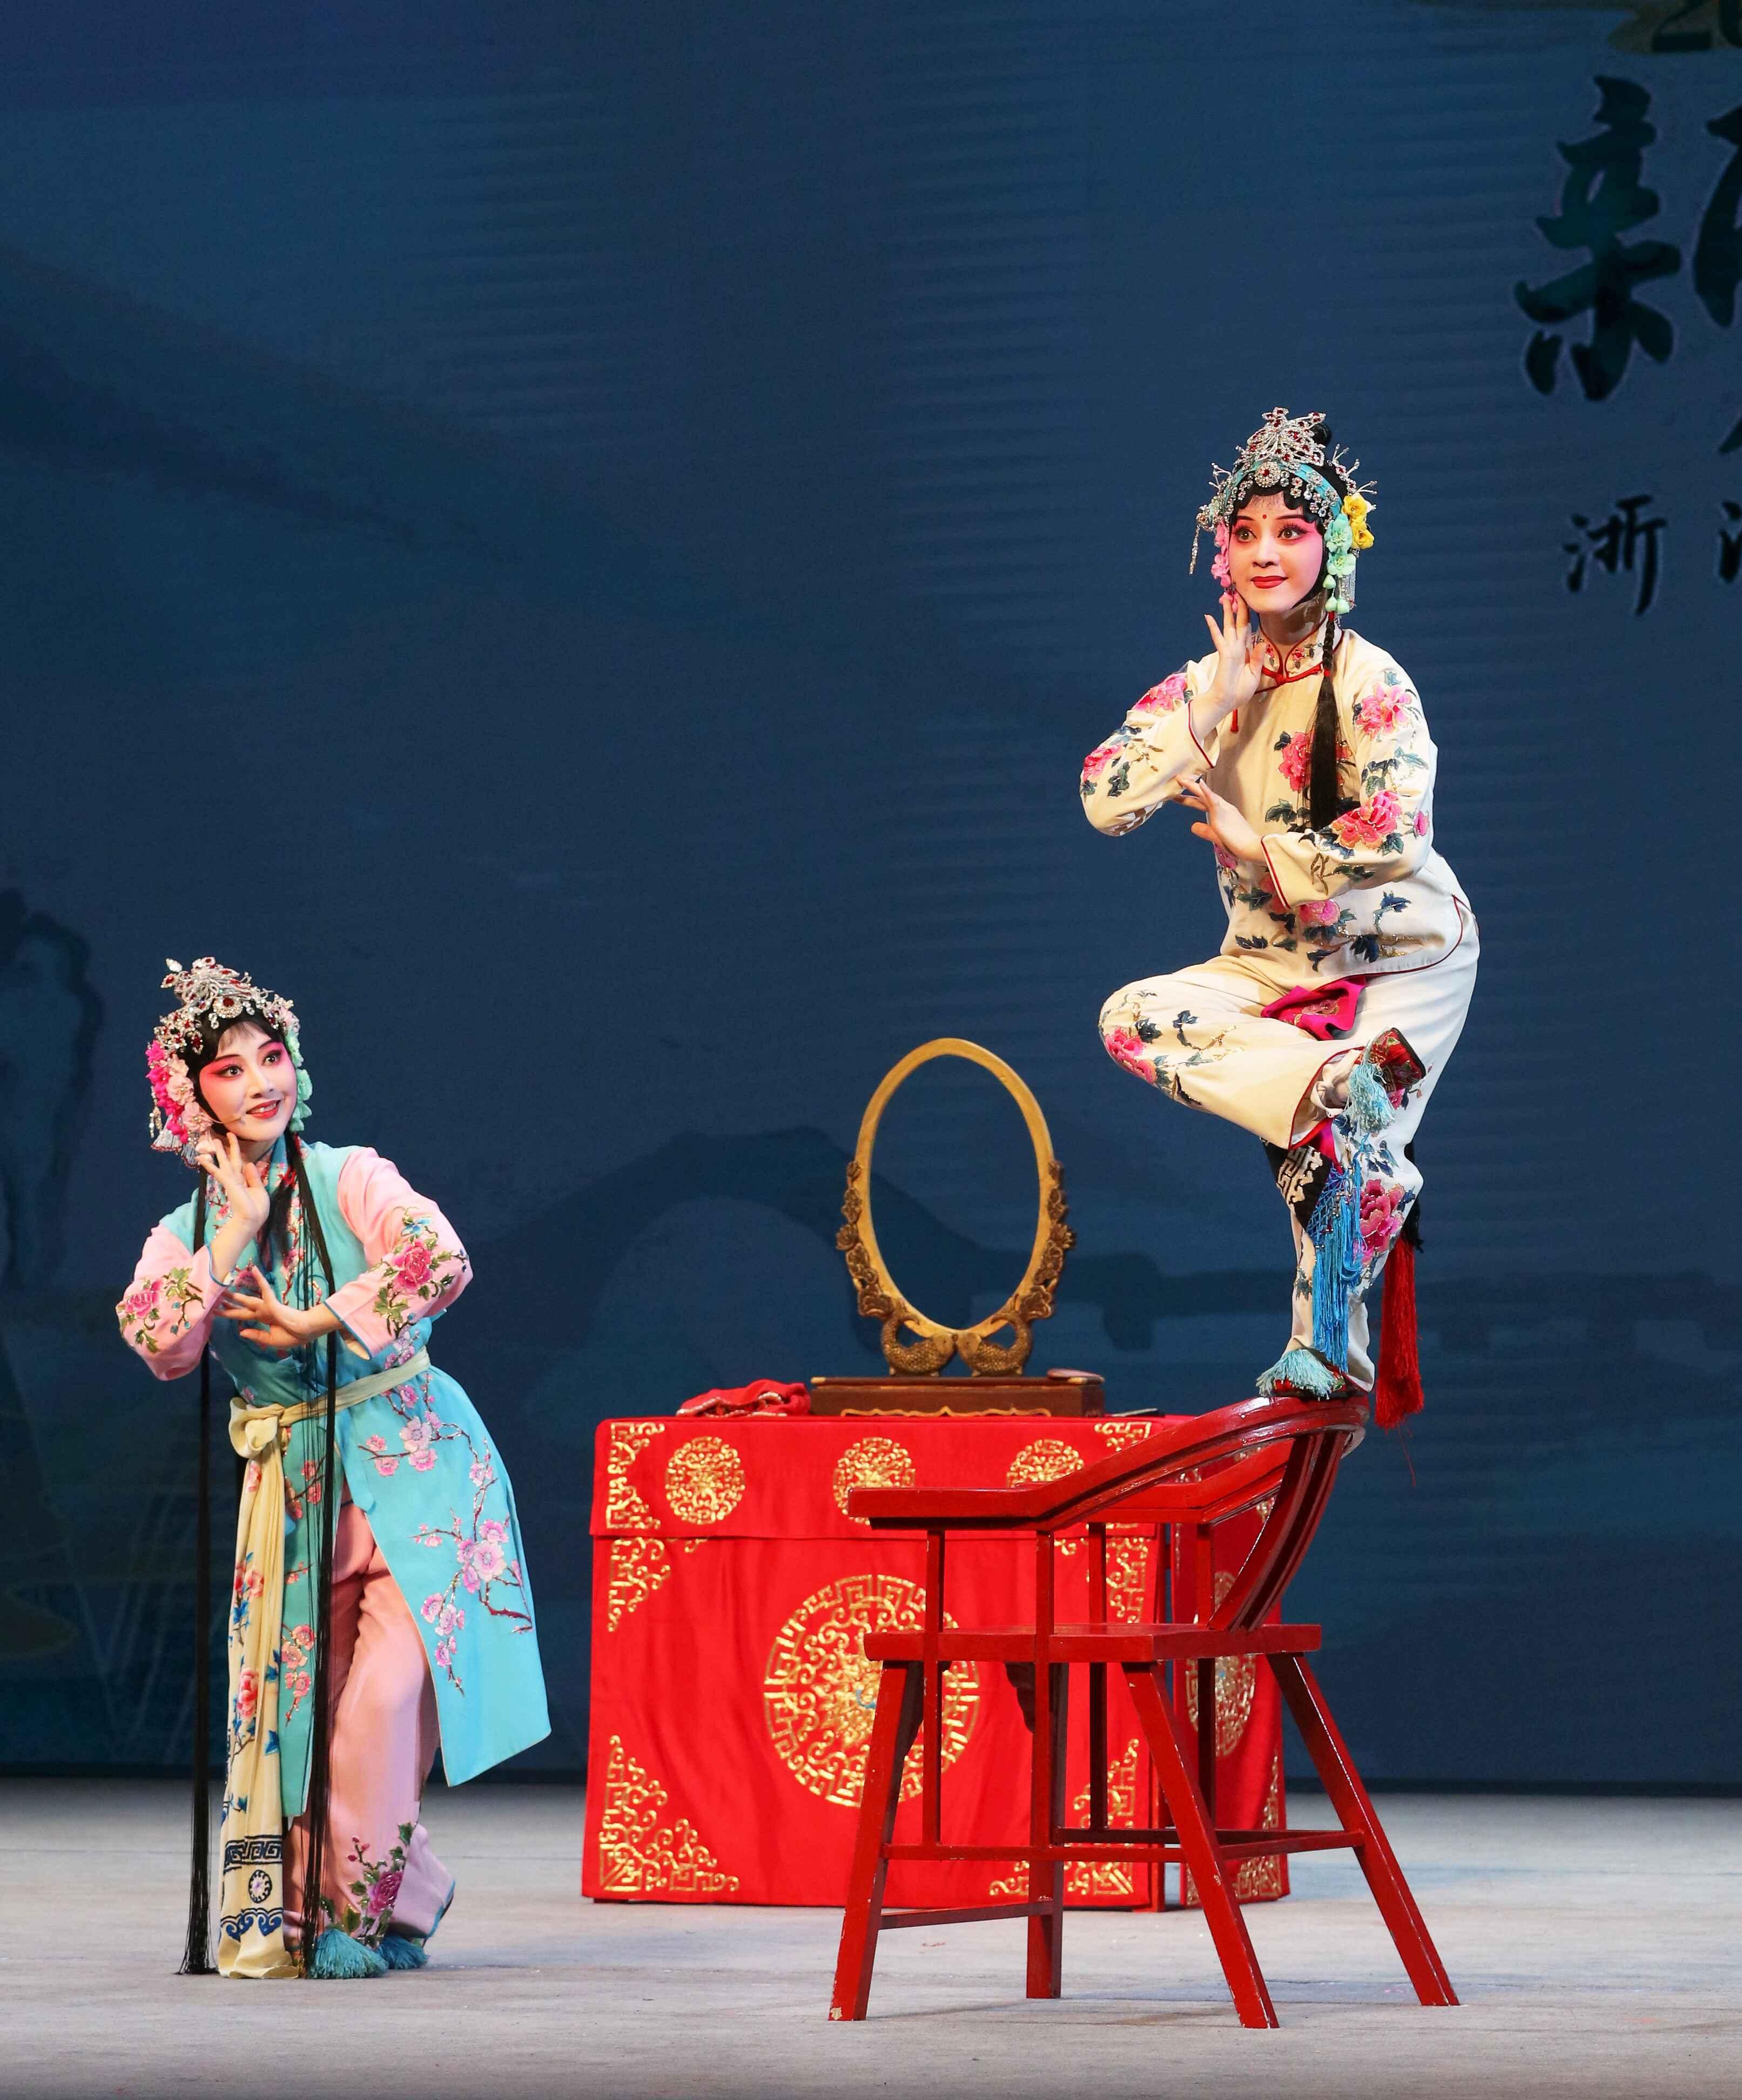 The Zhejiang Wu Opera Research Centre will return to Hong Kong to stage three Wu opera performances in late July at the inaugural Chinese Culture Festival, organised by the Leisure and Cultural Services Department. Photo shows a scene from excerpt "Hanging Up the Portrait".
